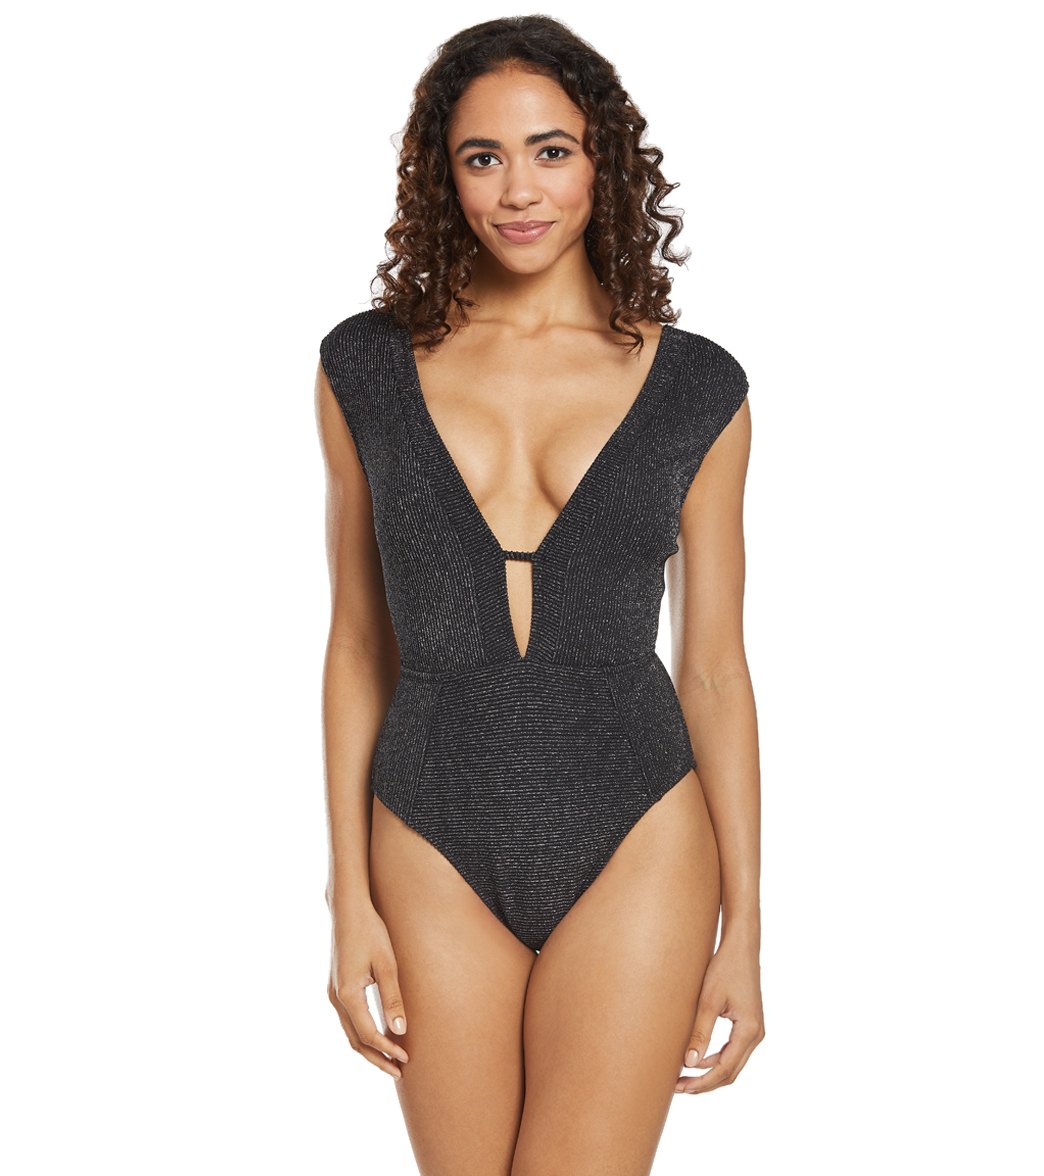 Kenneth Cole Luxury Rib Plunge One Piece Swimsuit - Black Large - Swimoutlet.com